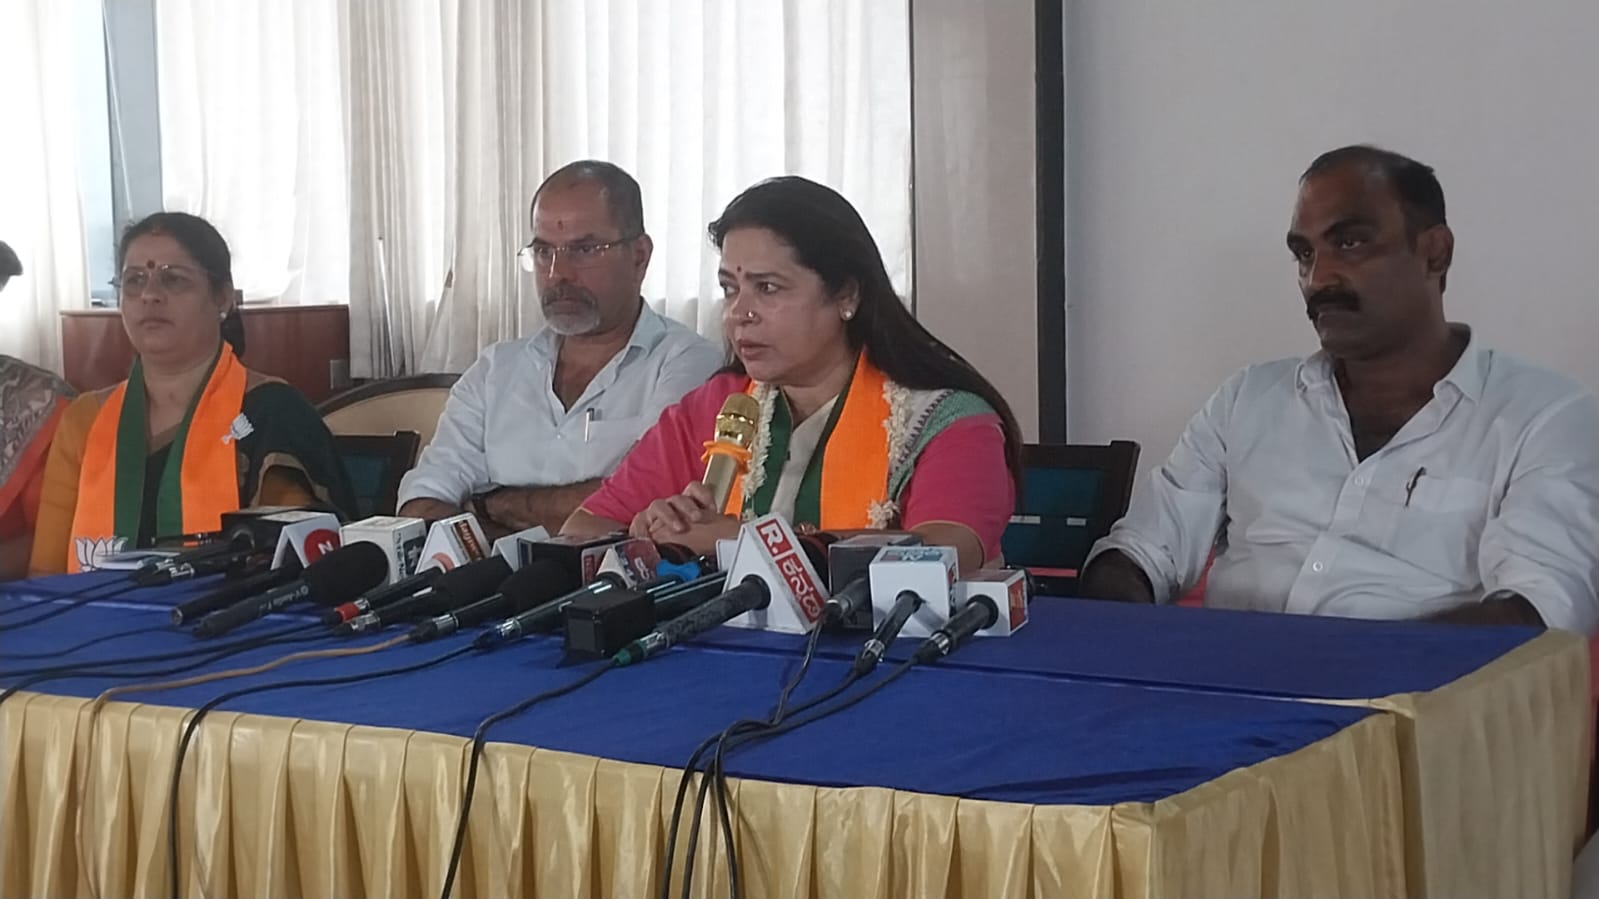 Congress conspiring to divide the country again on the based religion, caste and geographical considerations : Union Minister for External Affairs Mrs. Meenakshi Lekhi